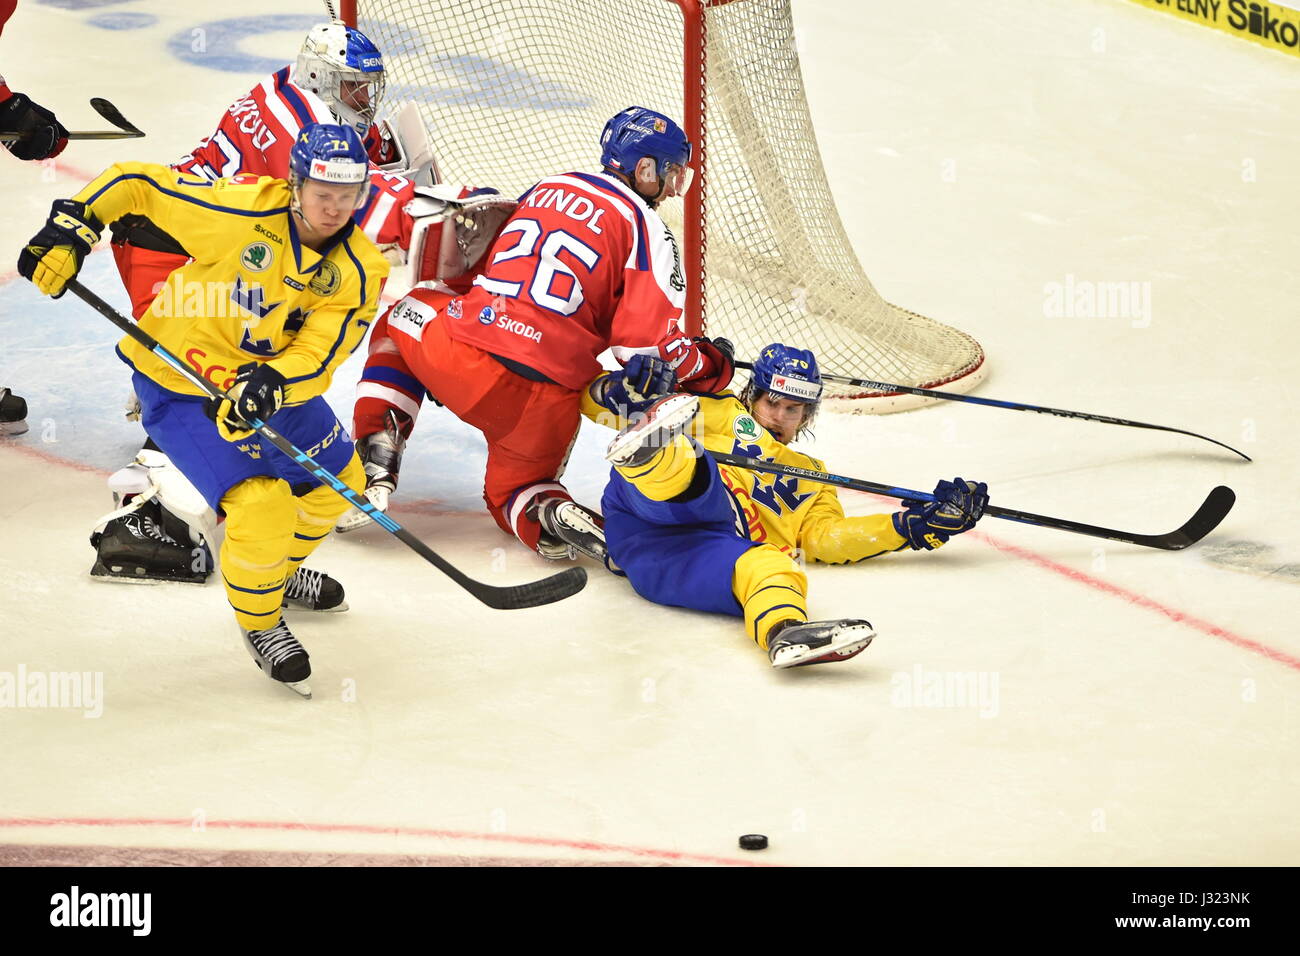 Ceske Budejovice, Czech Republic. 29th Apr, 2017. From left: William Karlson (SWE), goalkeeper Pavel Francouz and Jakub Kindl (CZE) and Mario Kempe (SWE) in action during the Sweden vs Finland match of Czech Ice hockey Games, part of Euro Hockey Tour in Ceske Budejovice, Czech Republic, April 29, 2017. Credit: Vaclav Pancer/CTK Photo/Alamy Live News Stock Photo